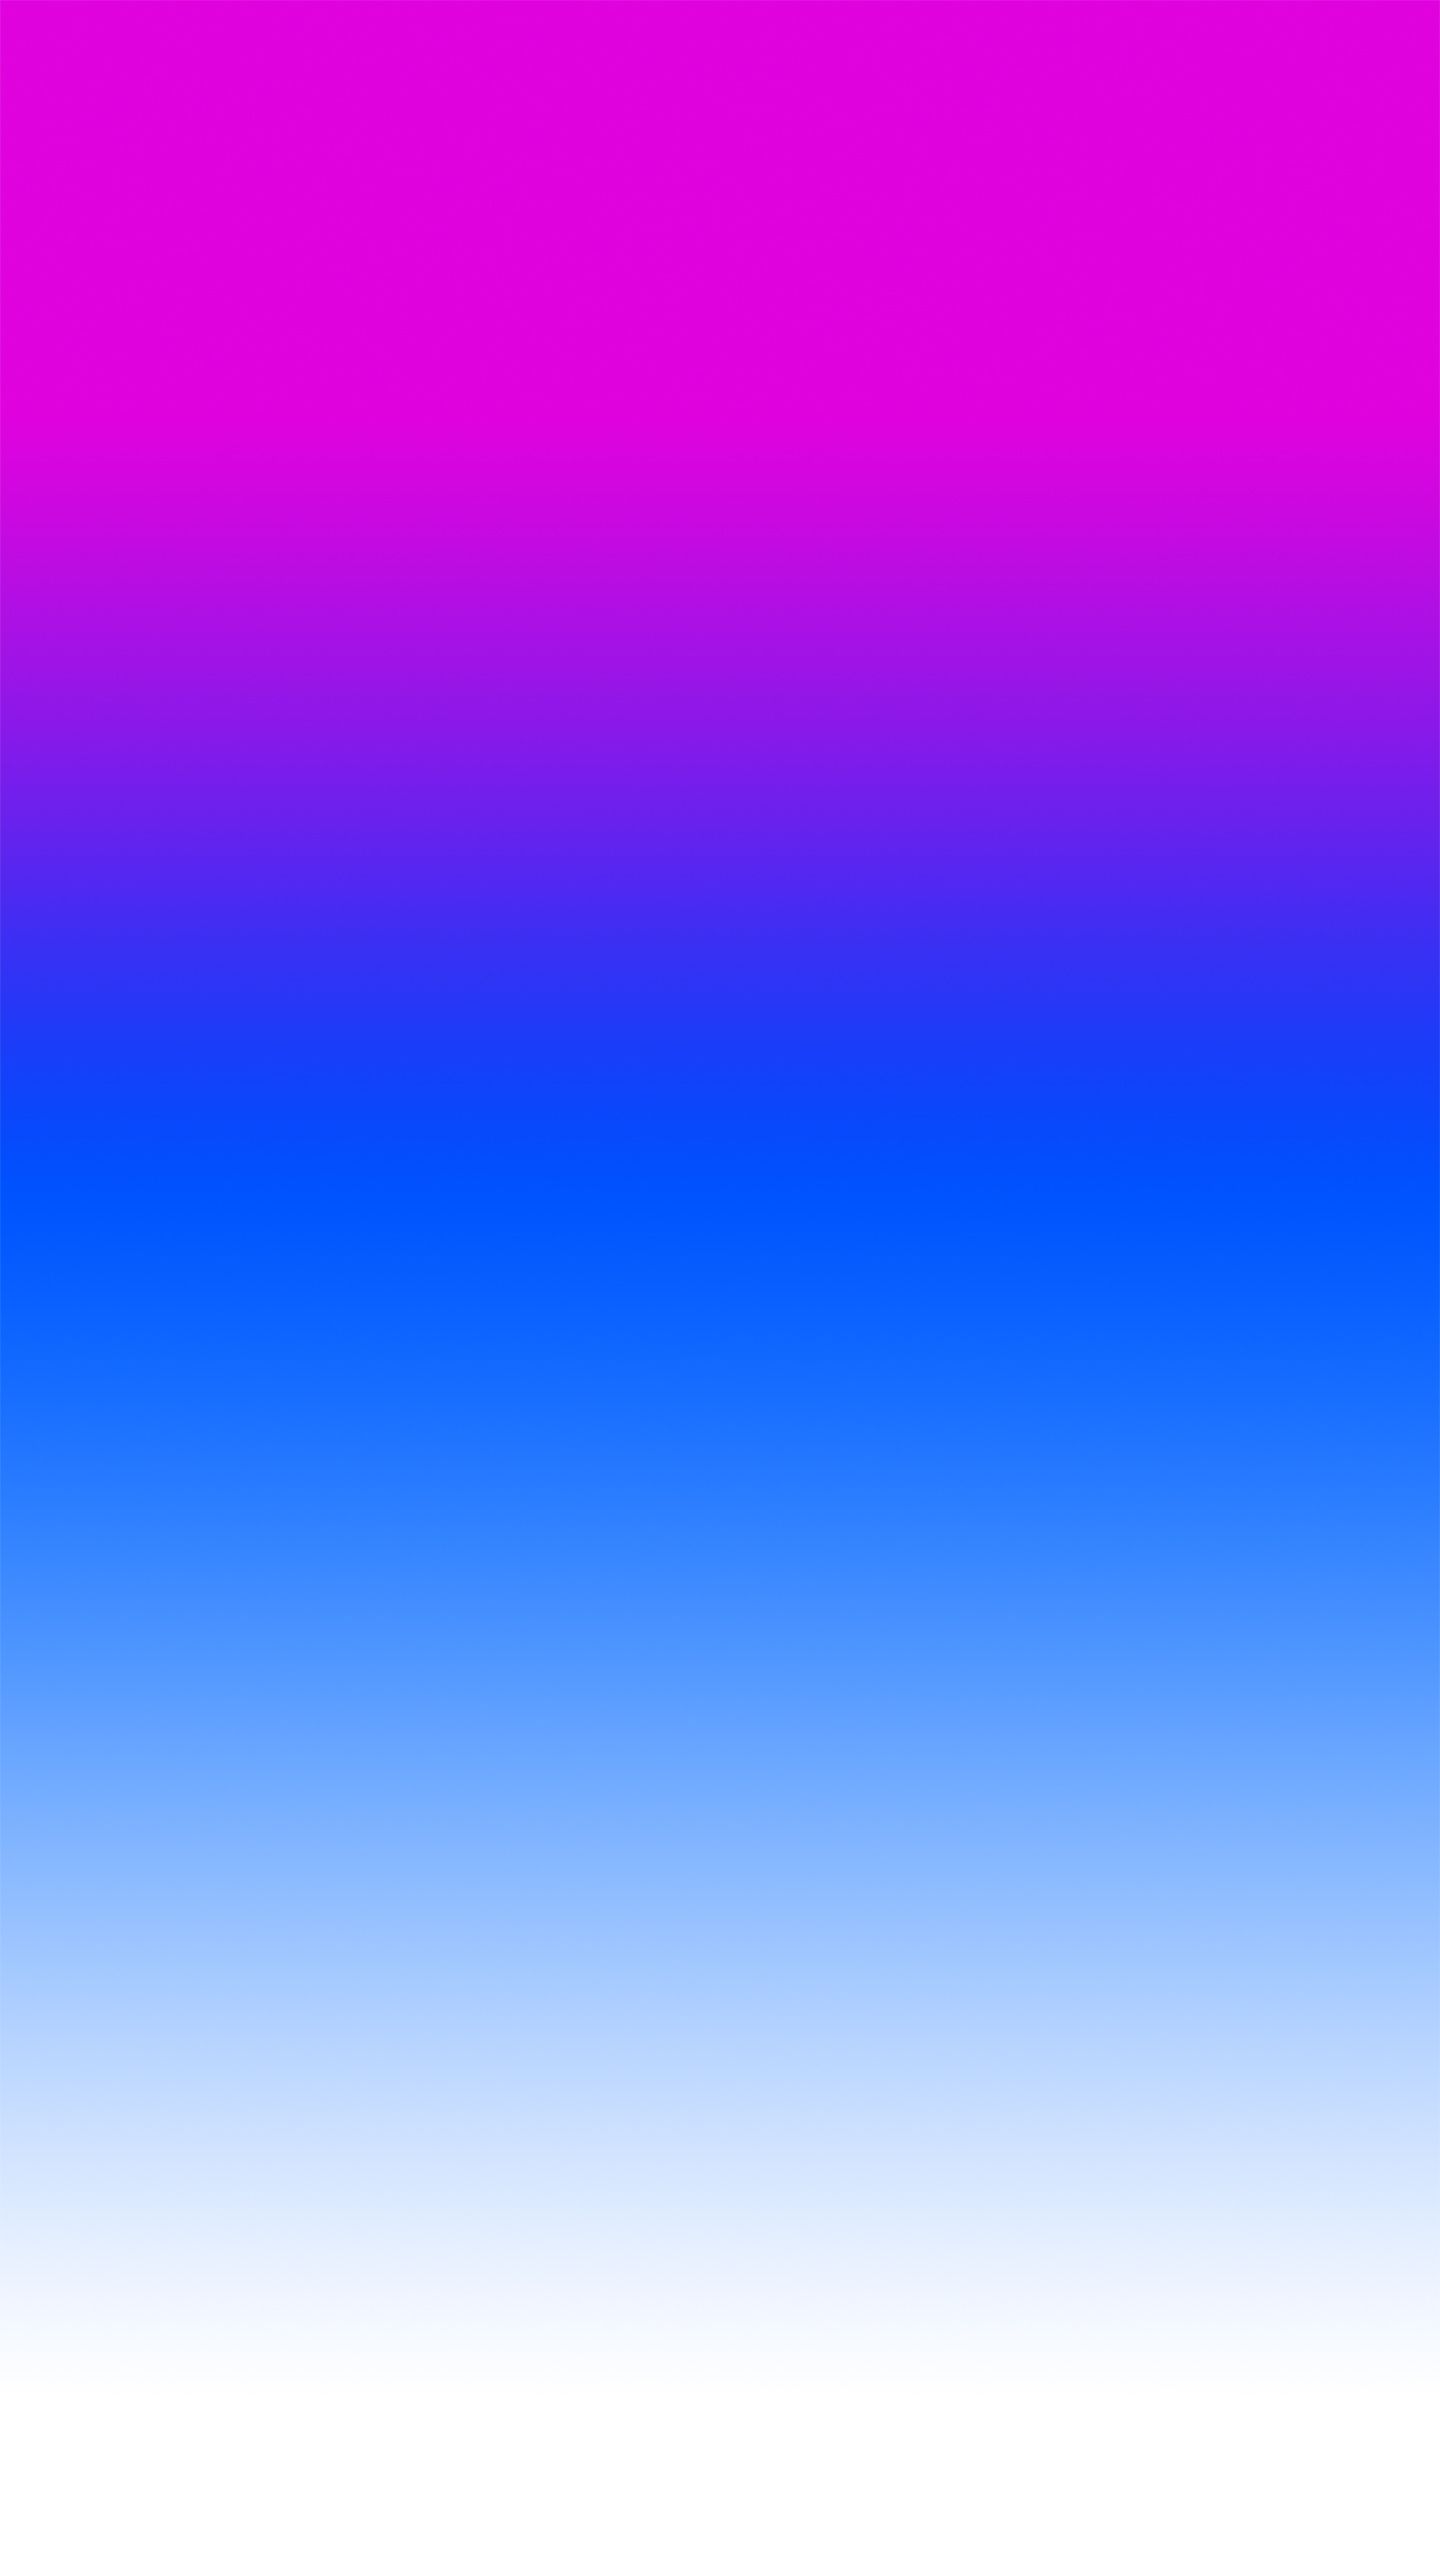 Blue And Pink Blend Wallpapers - Wallpaper Cave